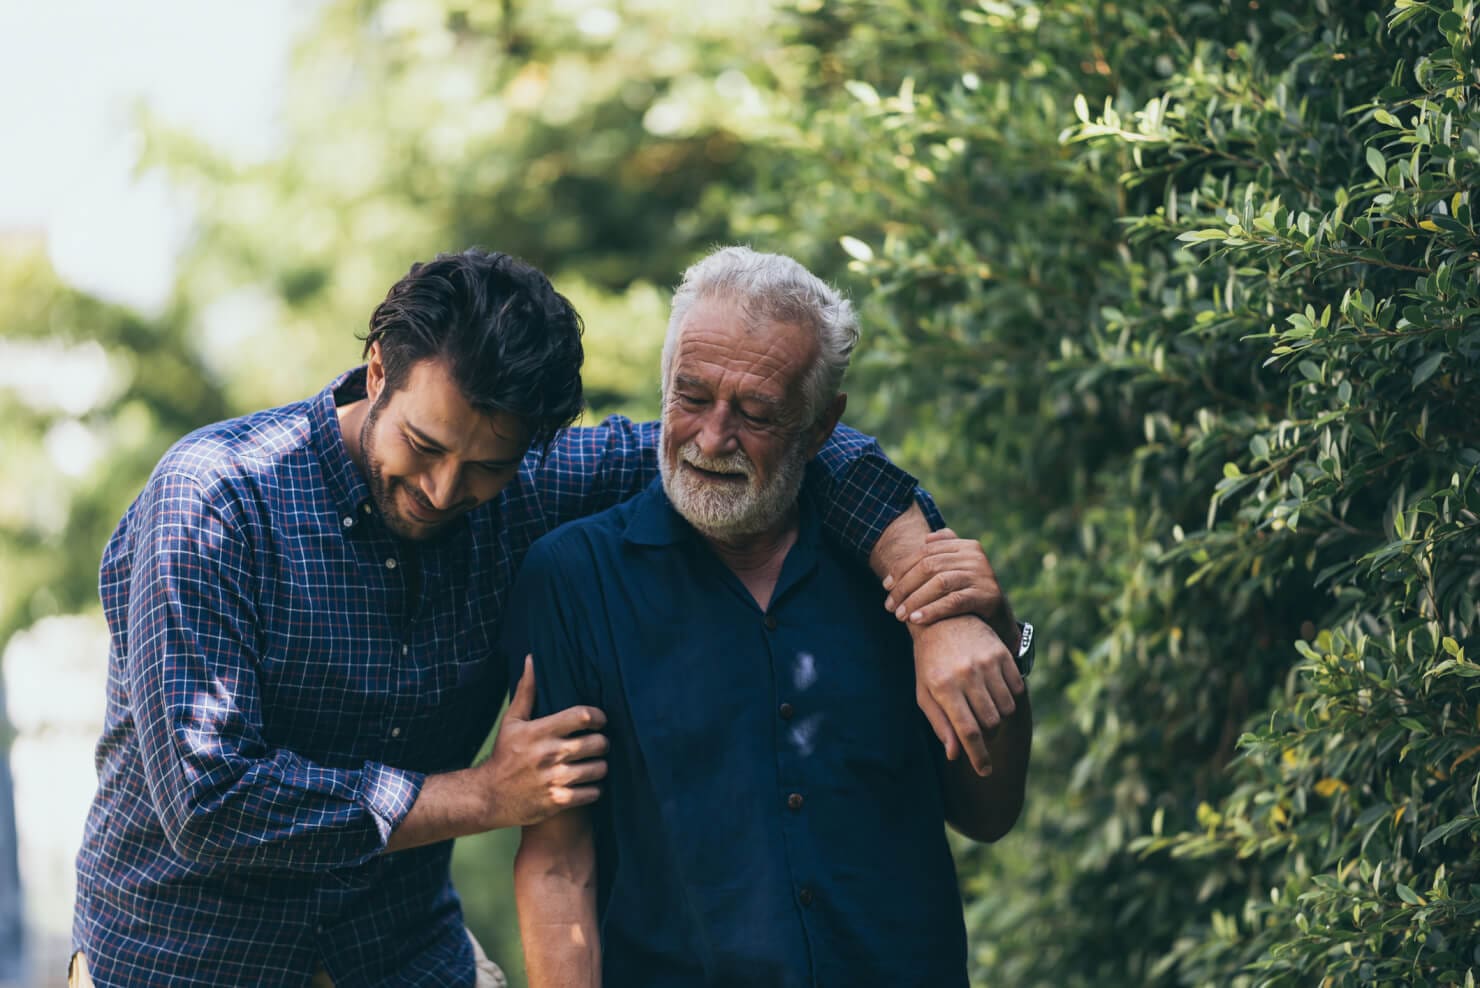 Two older men embracing each other in a park near an addiction recovery center.